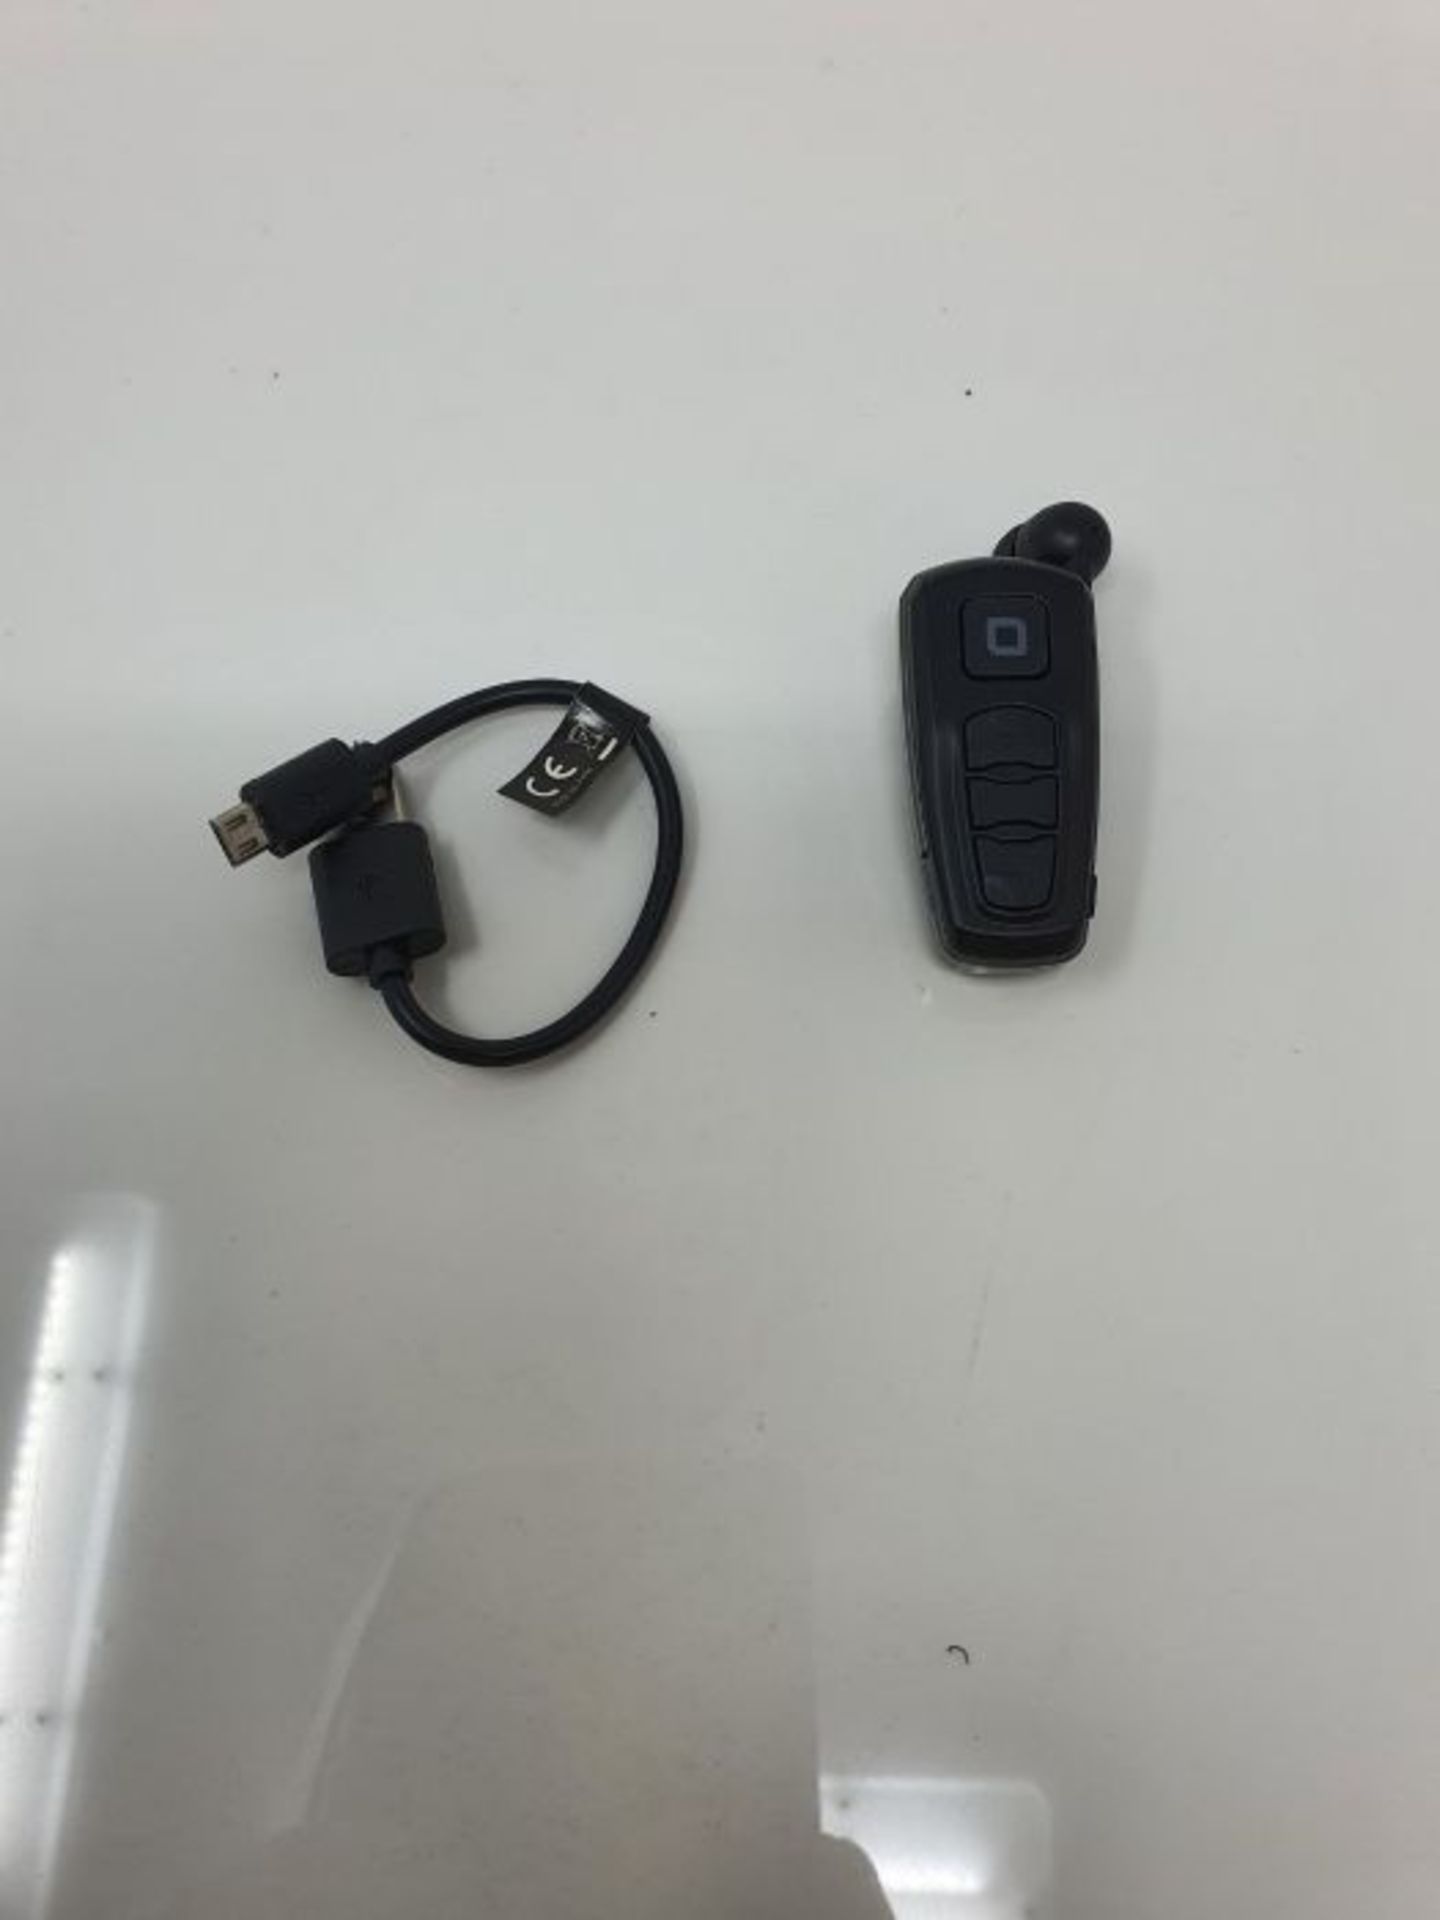 SBS Bluetooth Headset with Clip and Roll-up Wire Multipoint Technology to connect 2 de - Image 3 of 3